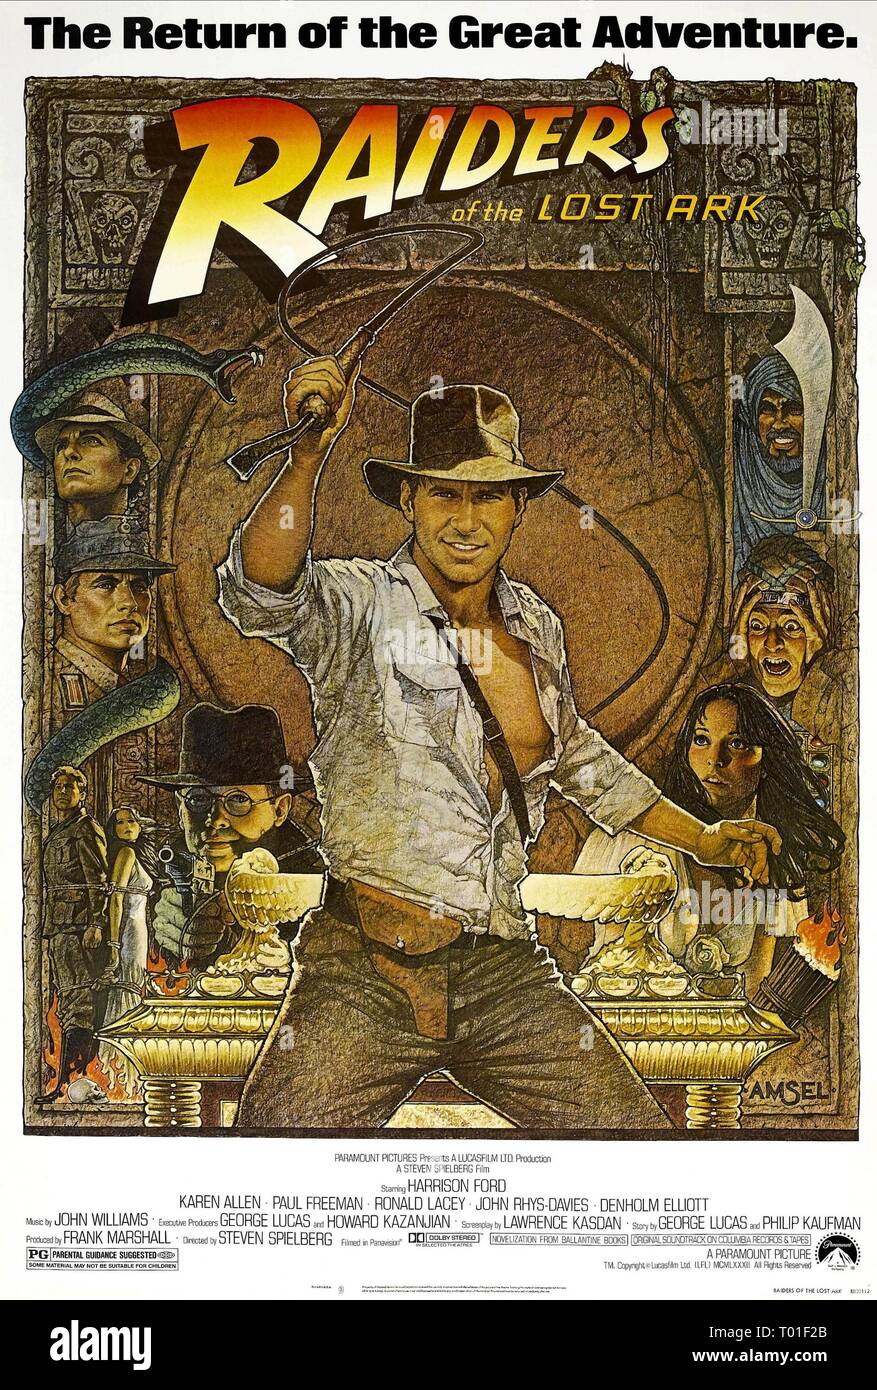 HARRISON FORD POSTER, INDIANA JONES AND THE RAIDERS OF THE LOST ARK, 1981 Stock Photo